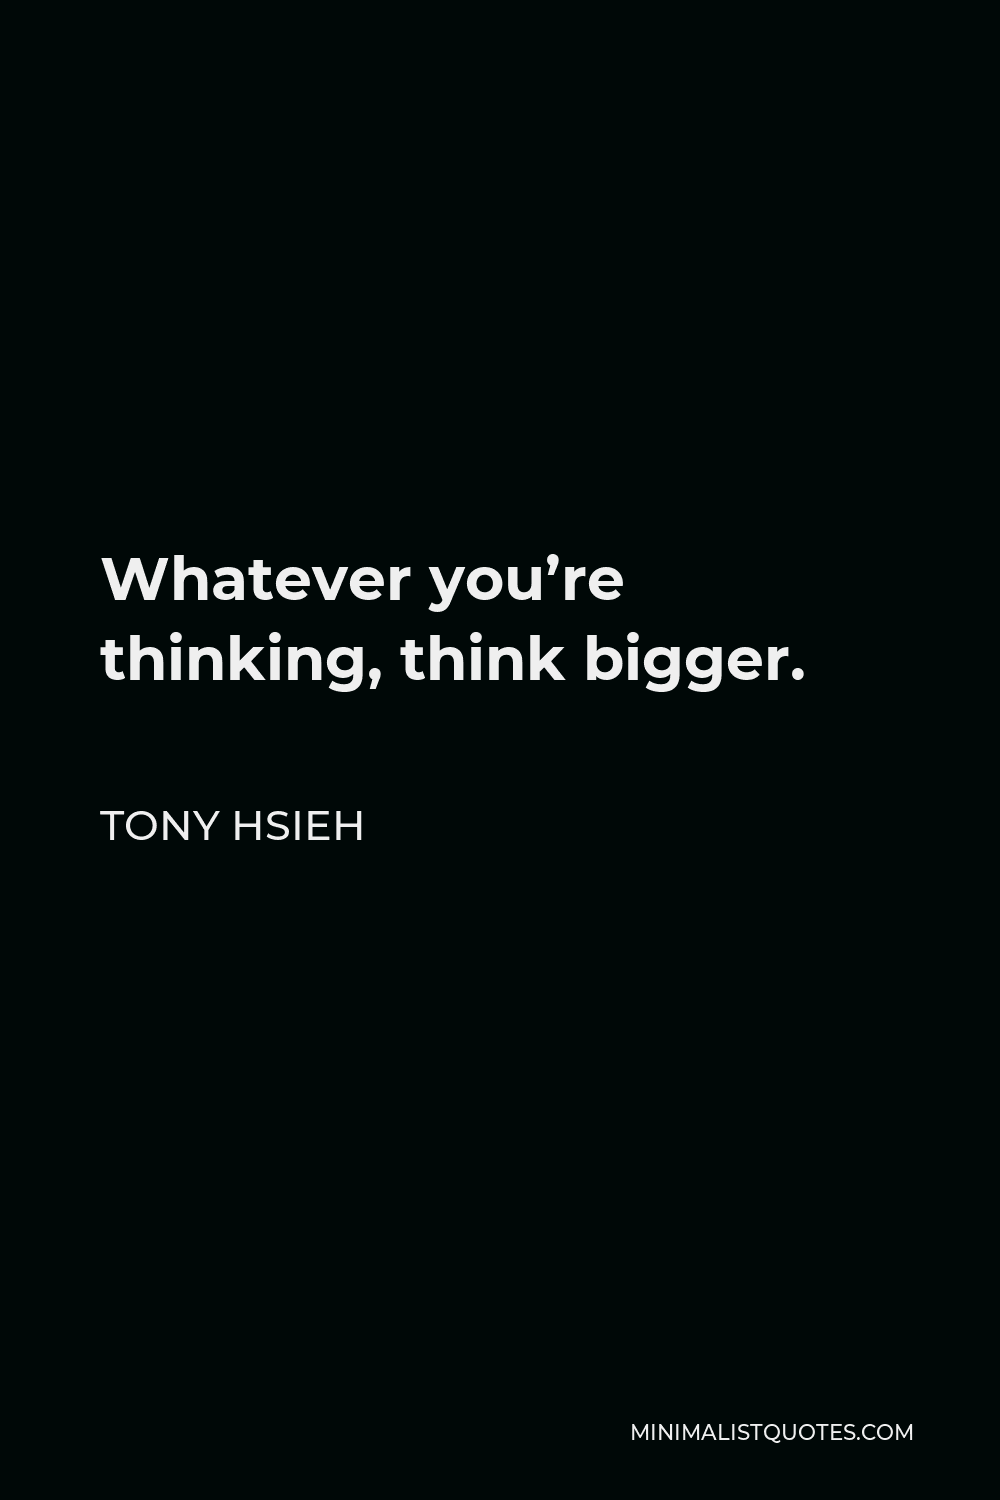 Tony Hsieh Quote - Whatever you’re thinking, think bigger.